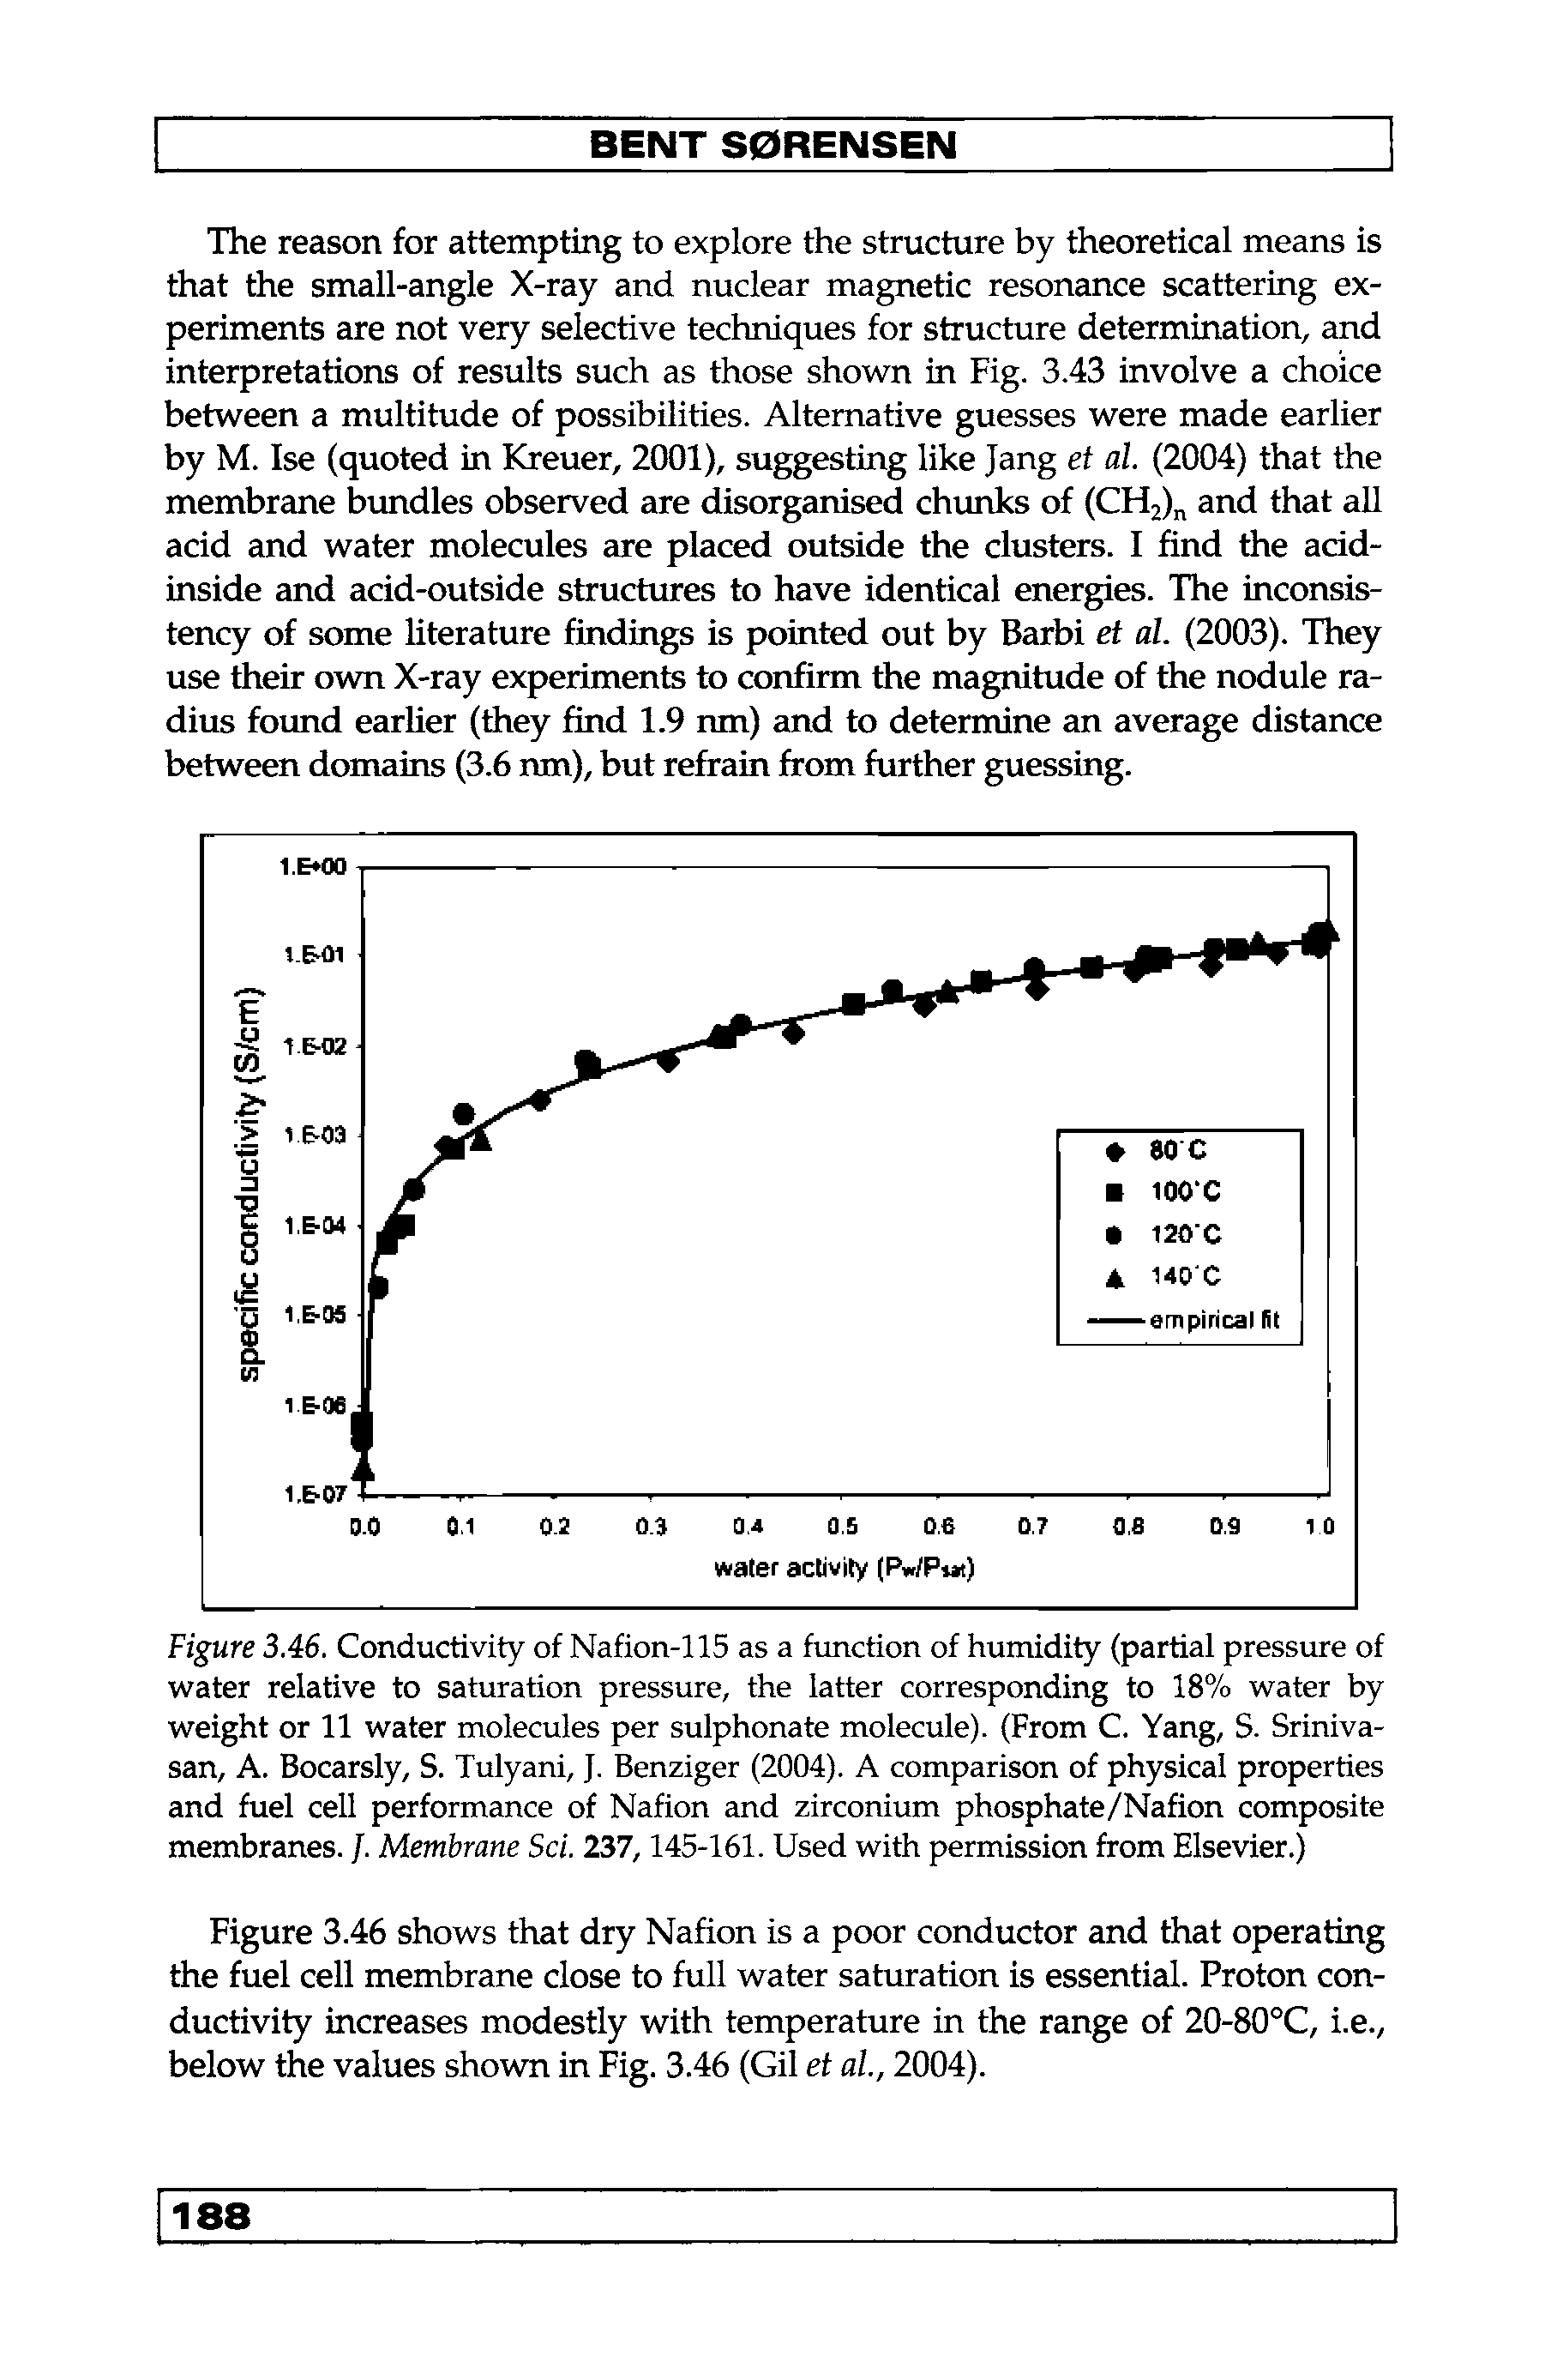 Figure 3.46. Conductivity of Nafion-115 as a function of humidity (partial pressure of water relative to saturation pressure, the latter corresponding to 18% water by weight or 11 water molecules per sulphonate molecule). (From C. Yang, S. Sriniva-san, A. Bocarsly, S. Tulyani, J. Benziger (2004). A comparison of physical properties and fuel cell performance of Nafion and zirconium phosphate/Nafion composite membranes. /. Membrane Sci. 737,145-161. Used with permission from Elsevier.)...